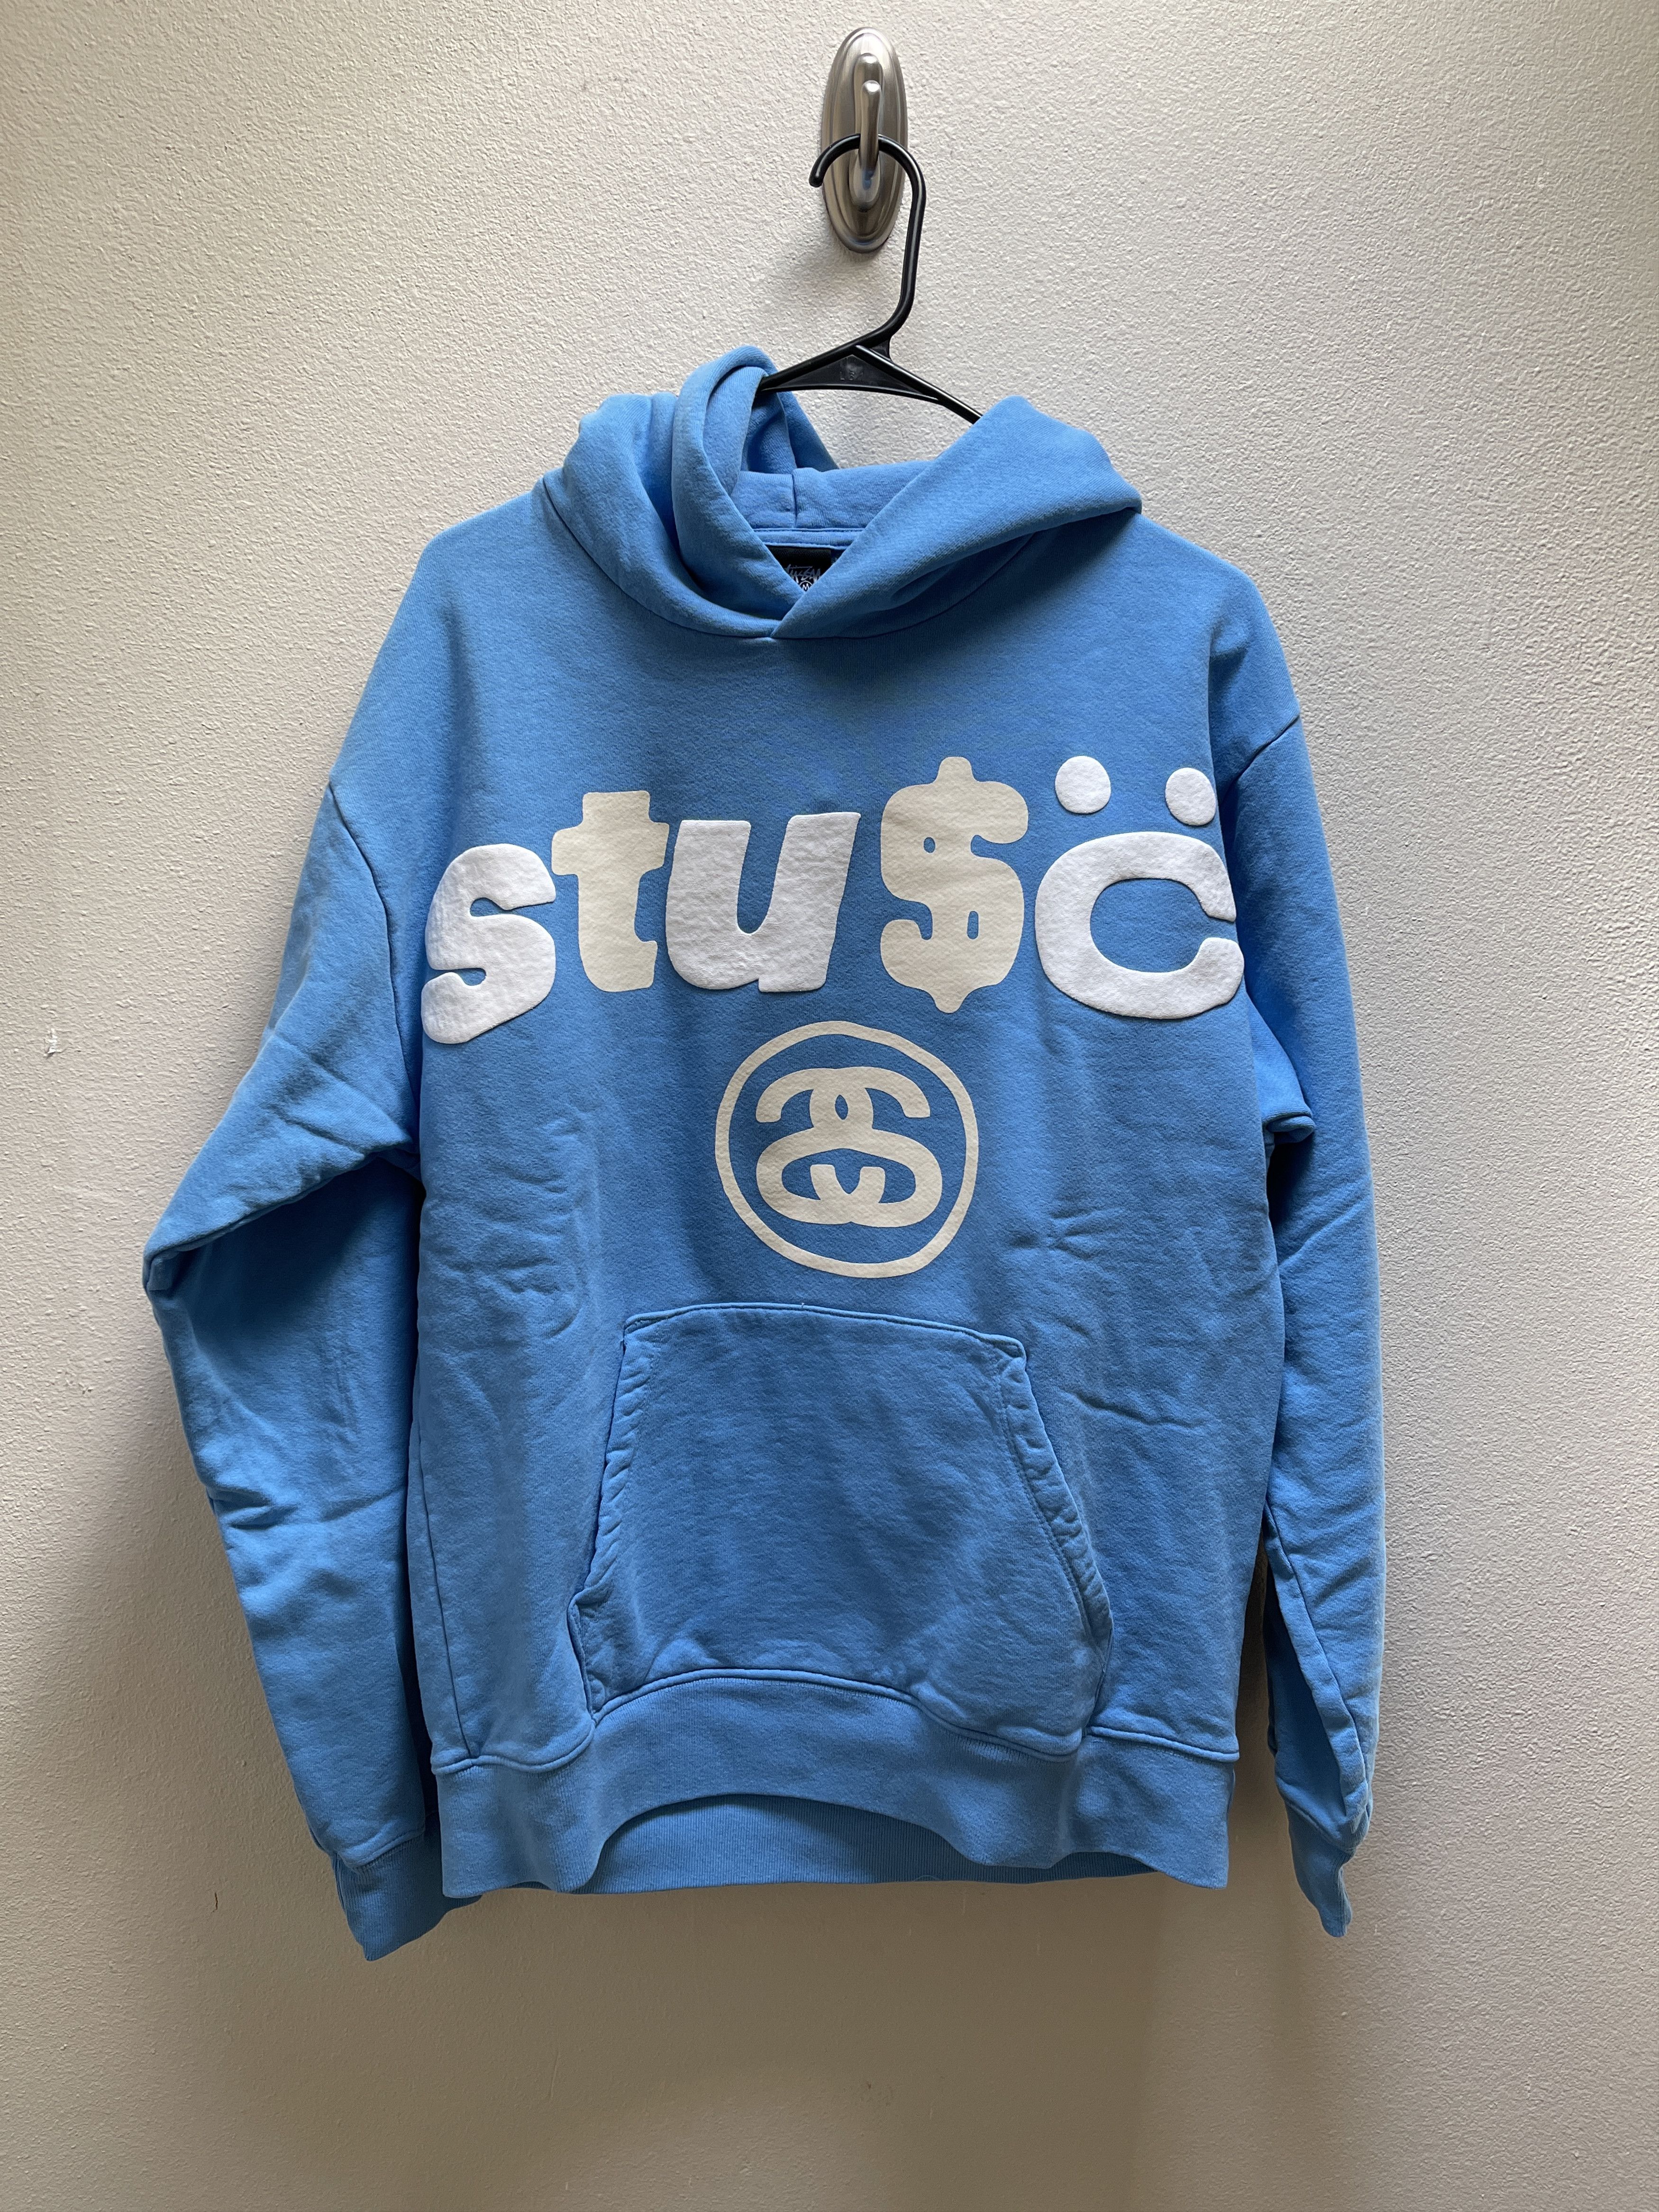 Stussy STUSSY & CPFM 8 BALL PIGMENT DYED HOODIE | Grailed